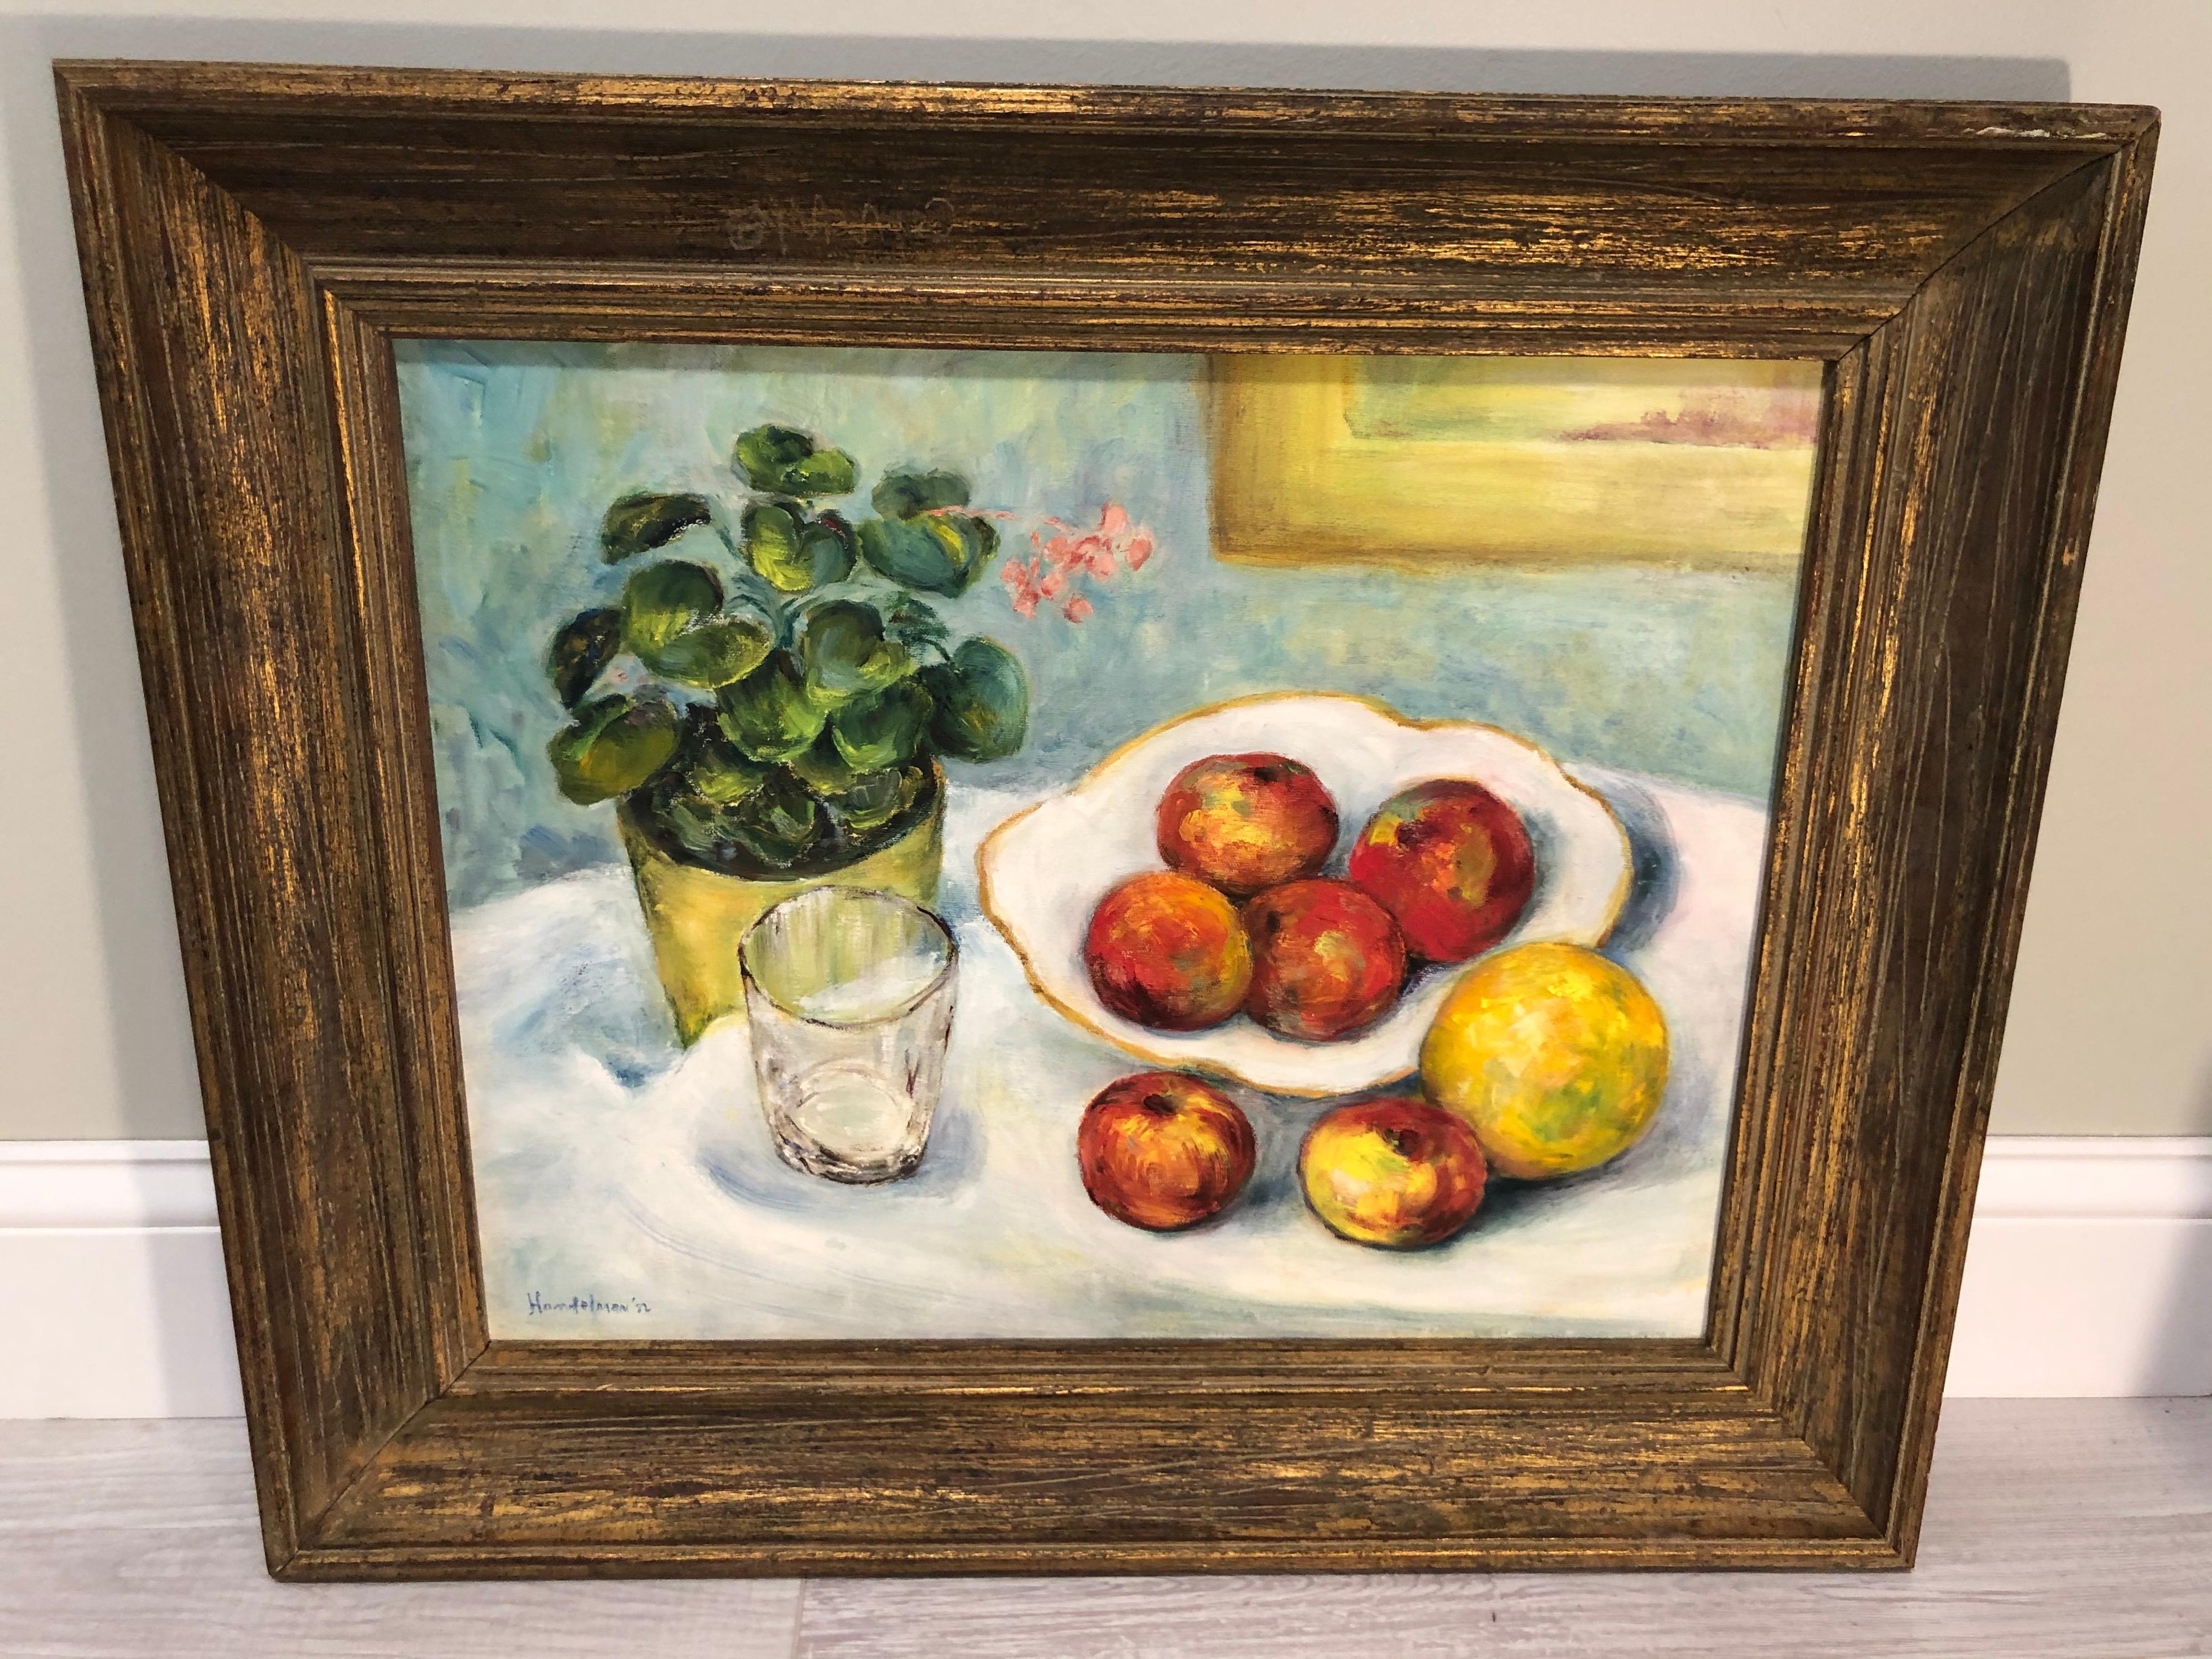 Fruit still life on canvas signed handlemen . Nice composition of fruit on a bowl, a plant and a glass. Simple realistic painting which would look great in a kitchen or diningroom.This can parcel ship domestically for $49.